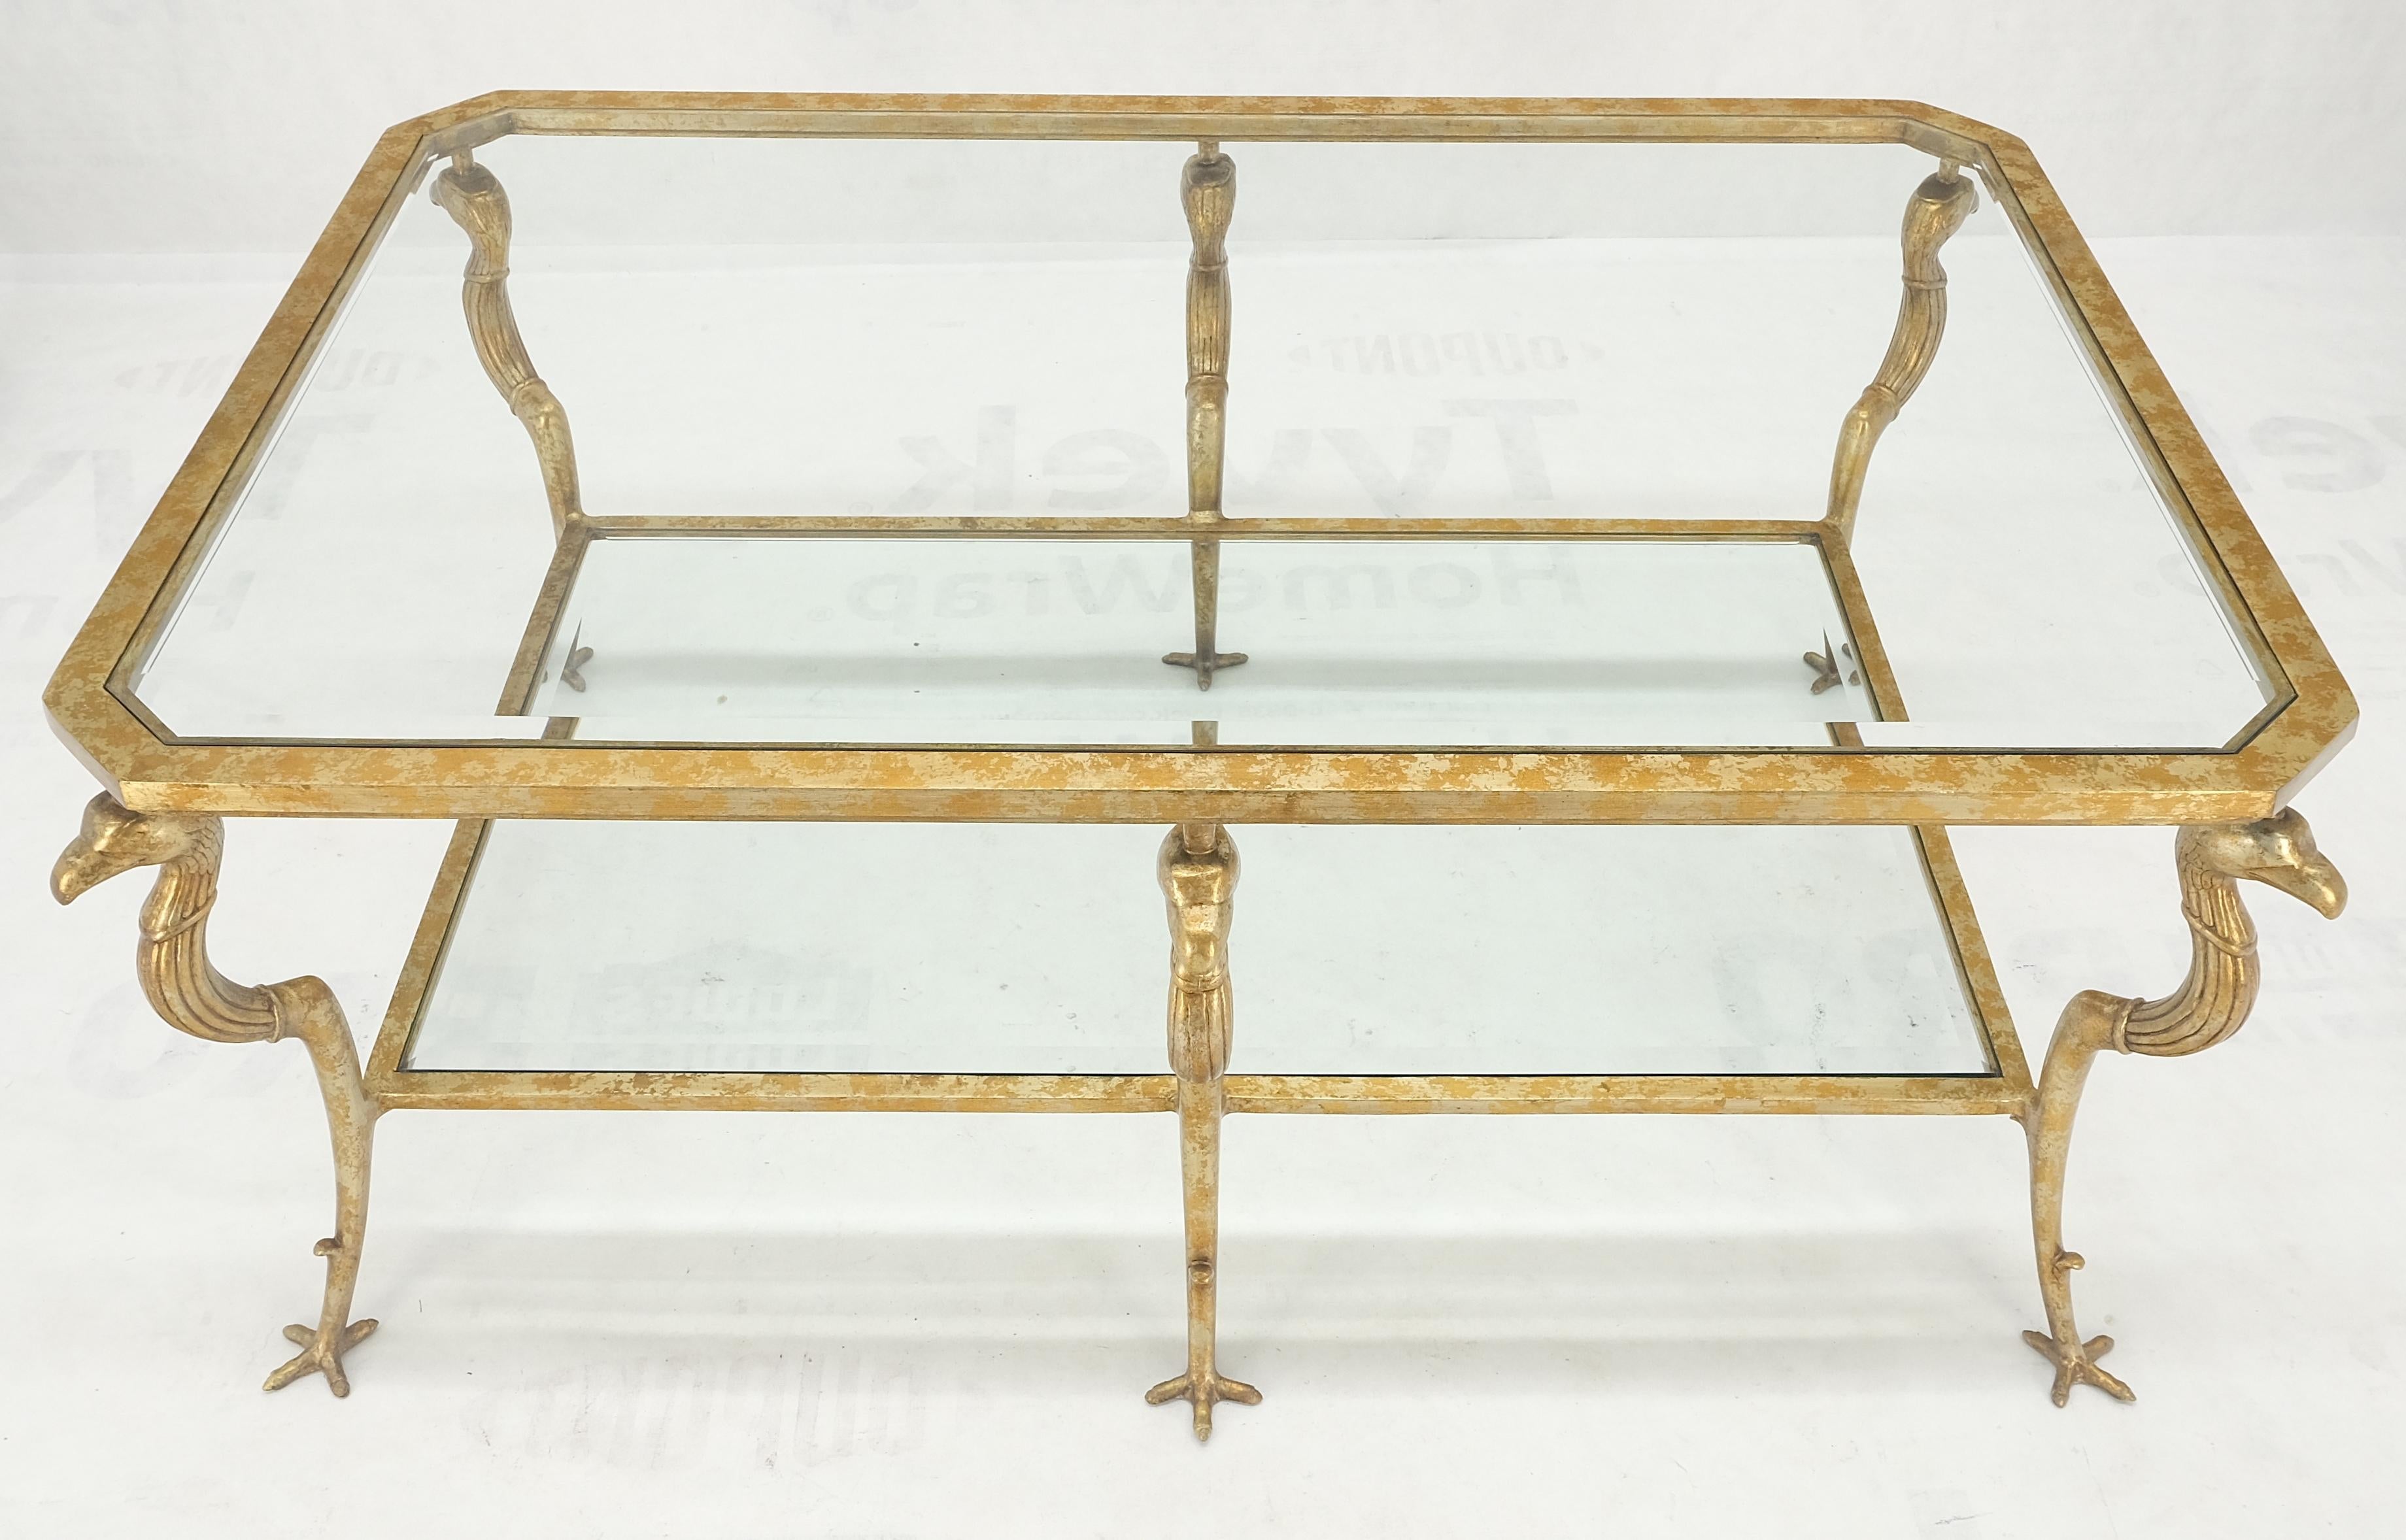 Silver & Gold Gilt Metal Glass Top Two Tier Eagle & Claw Motive Legs Rectangle Coffee Table MINT!
glass: 3/8